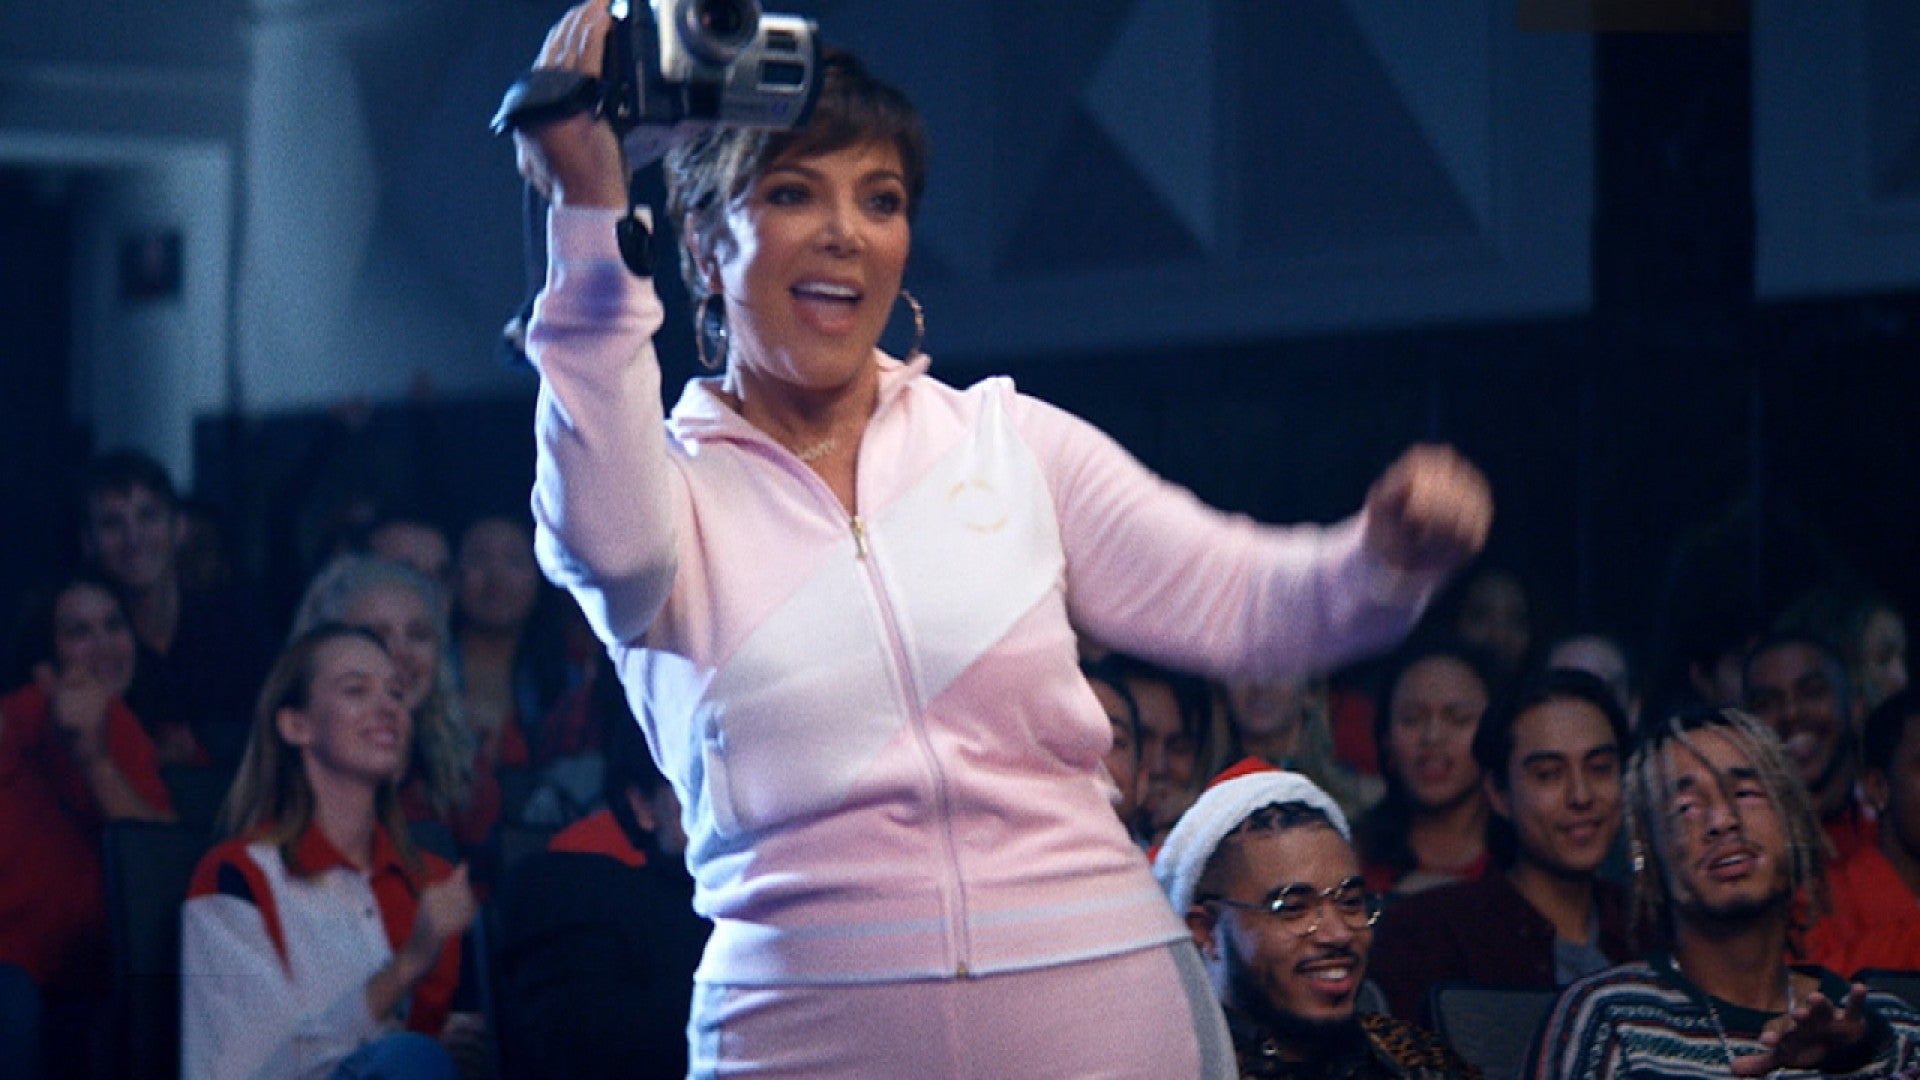 Kris Jenner Is the Standout Star in Ariana Grande's 'Thank U, Next' Video 